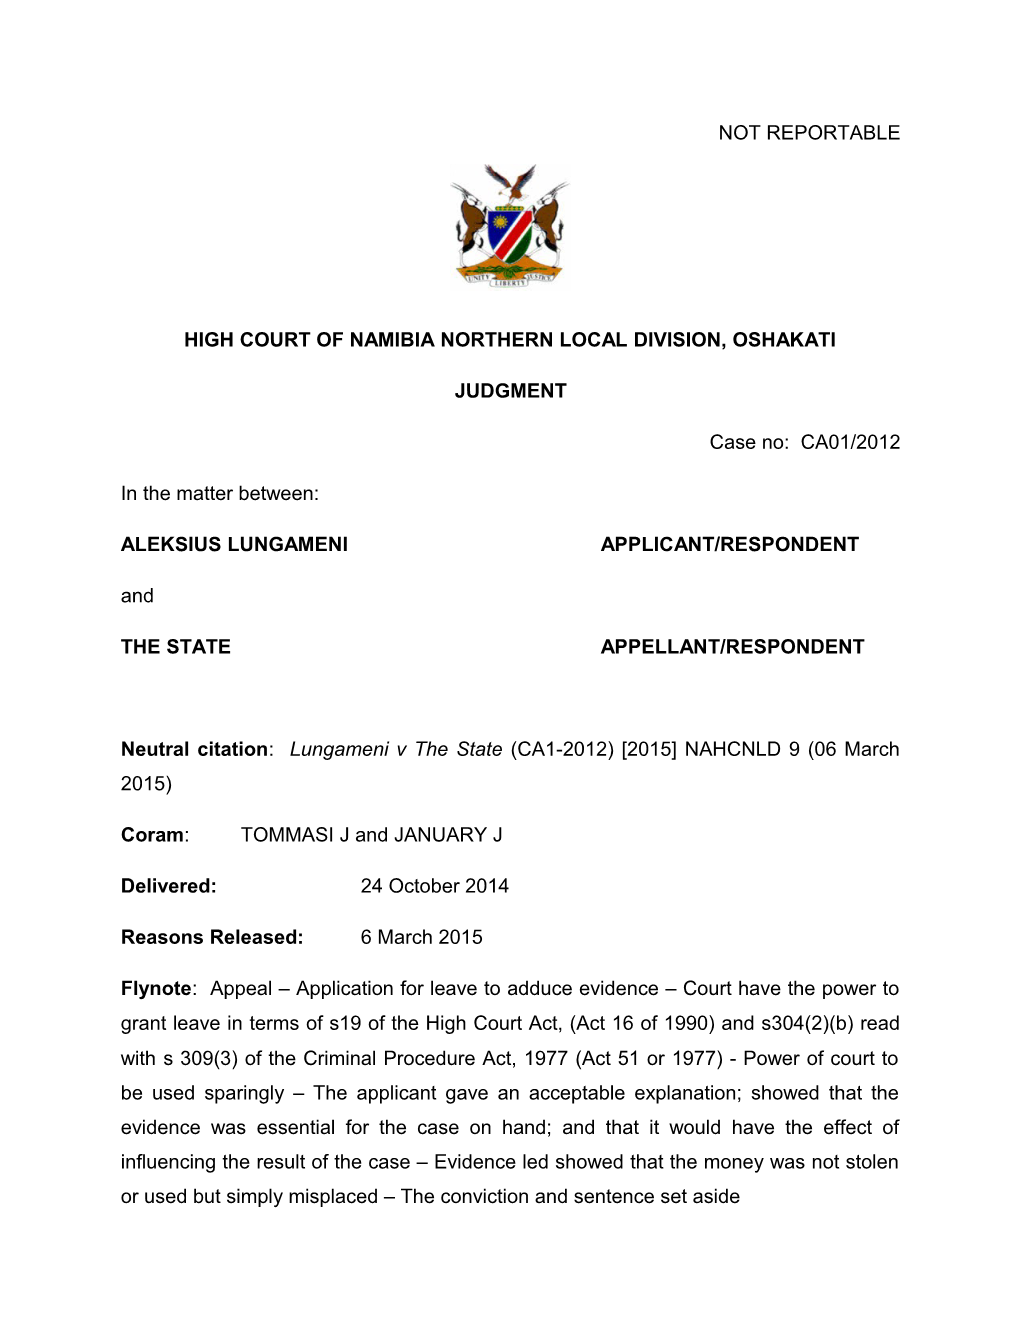 Lungameni V the State (CA1-2012) 2015 NAHCNLD 9 (06 March 2015)